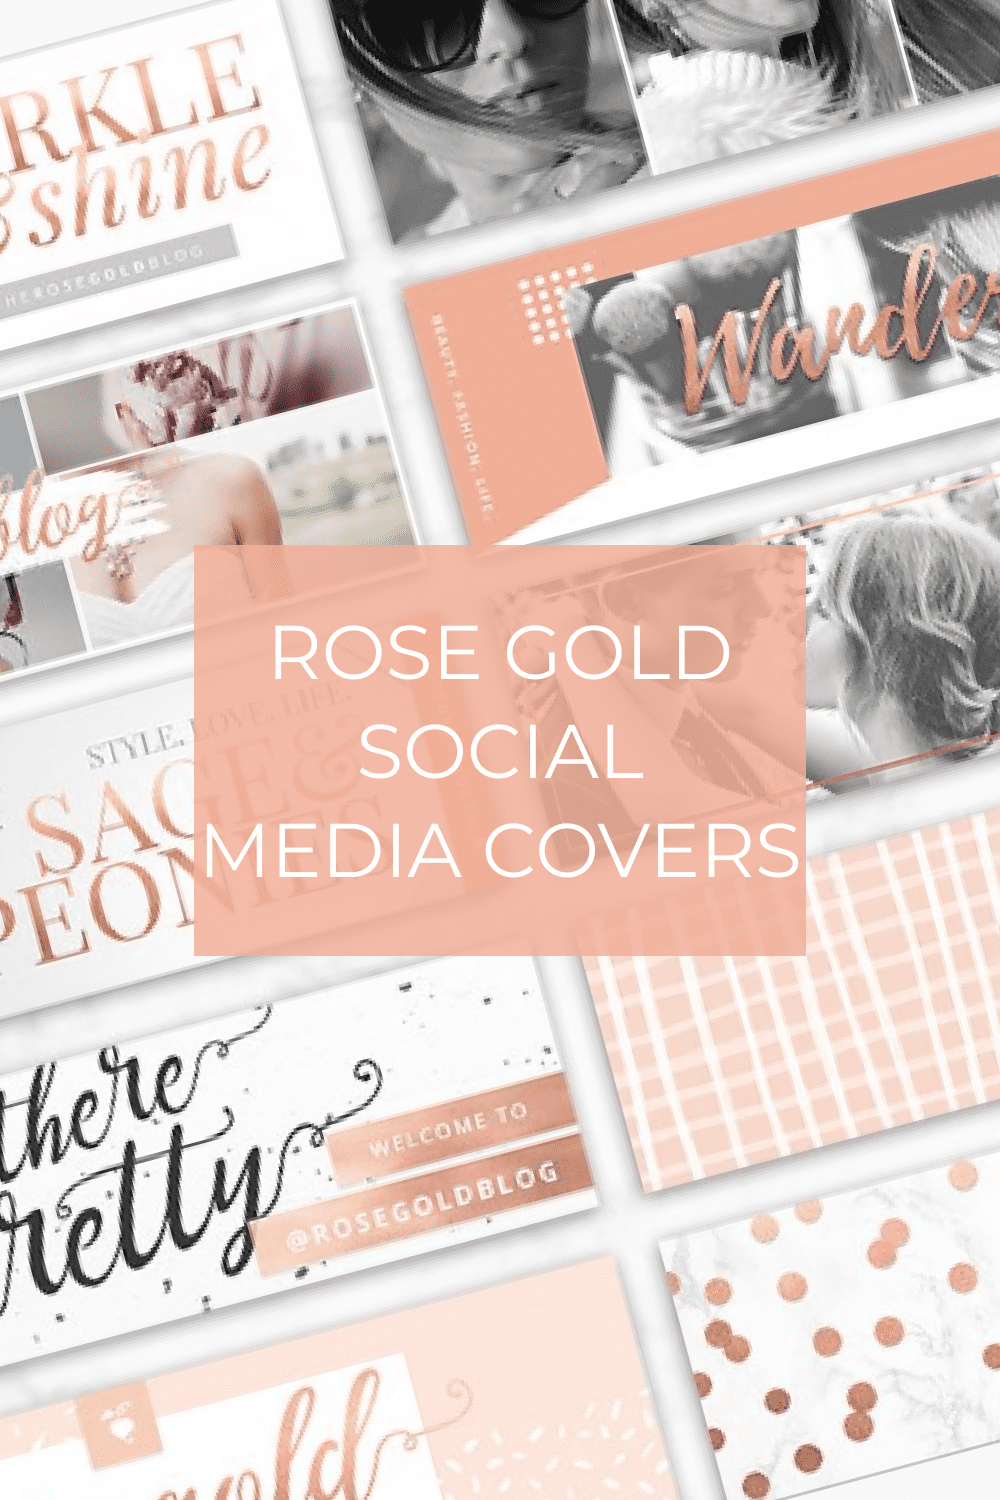 Peach color is a perfect color for social media.